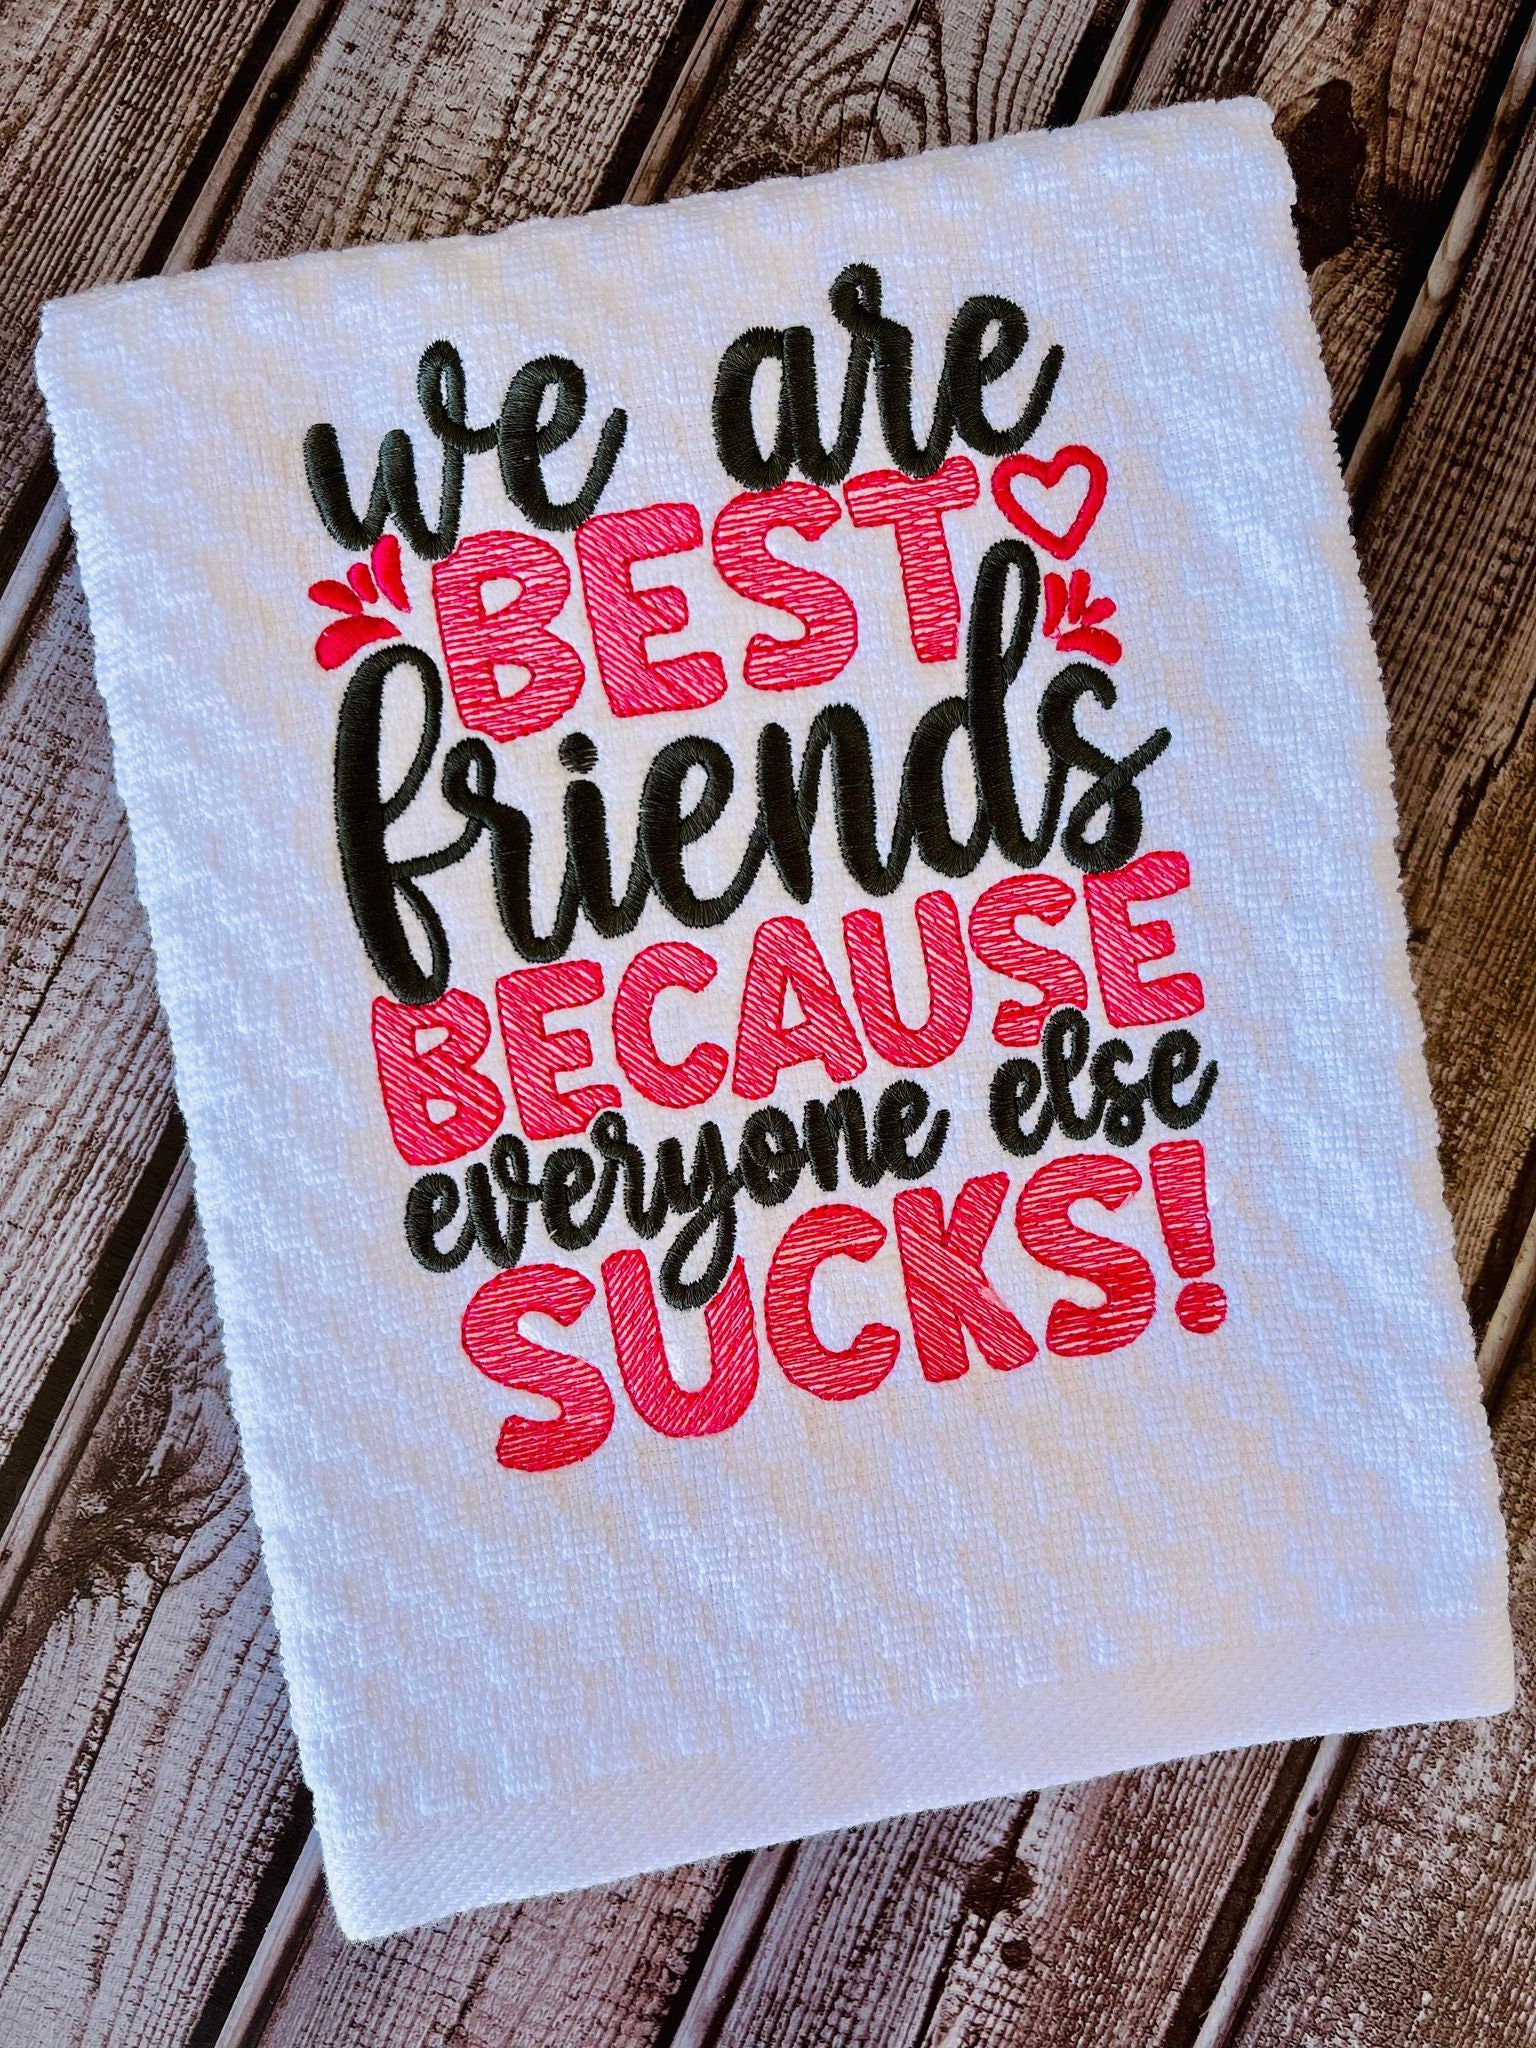 Best Friends Because Everyone Else Sucks- Premium Silicone Wrapped